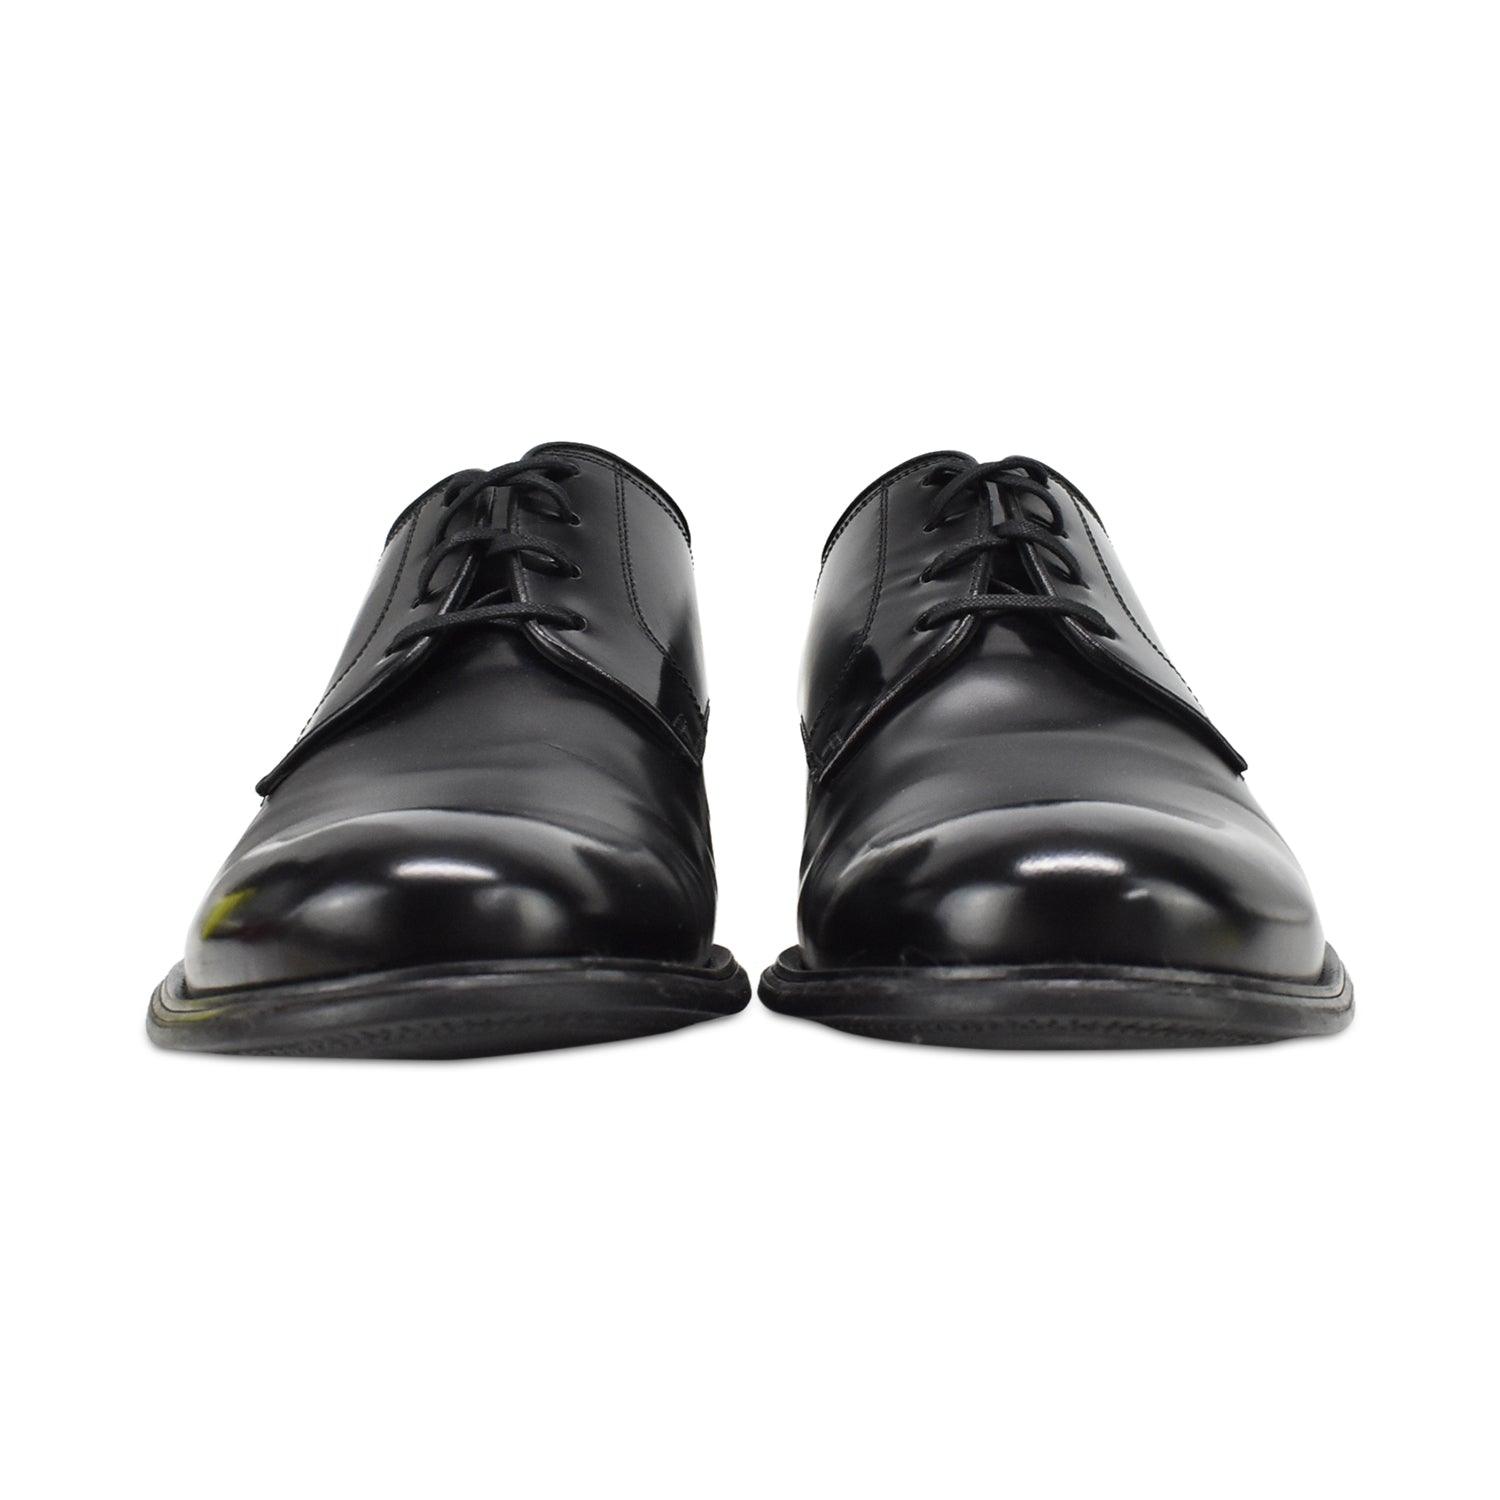 Dolce & Gabbana Dress Shoes - Men's 8 - Fashionably Yours